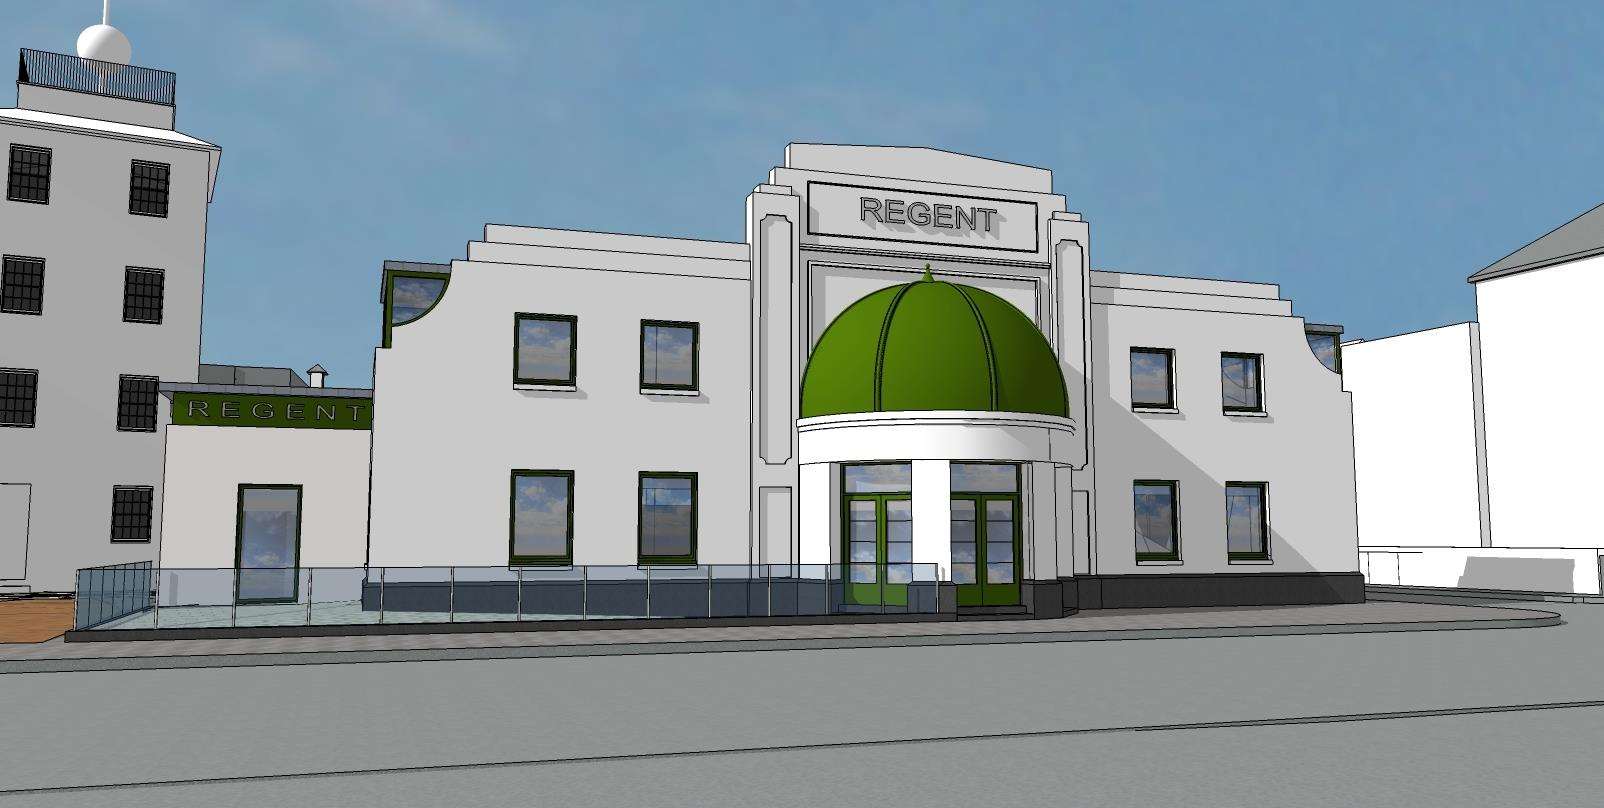 The latest plans for The Regent in Deal have been submitted to DDC (6236292)